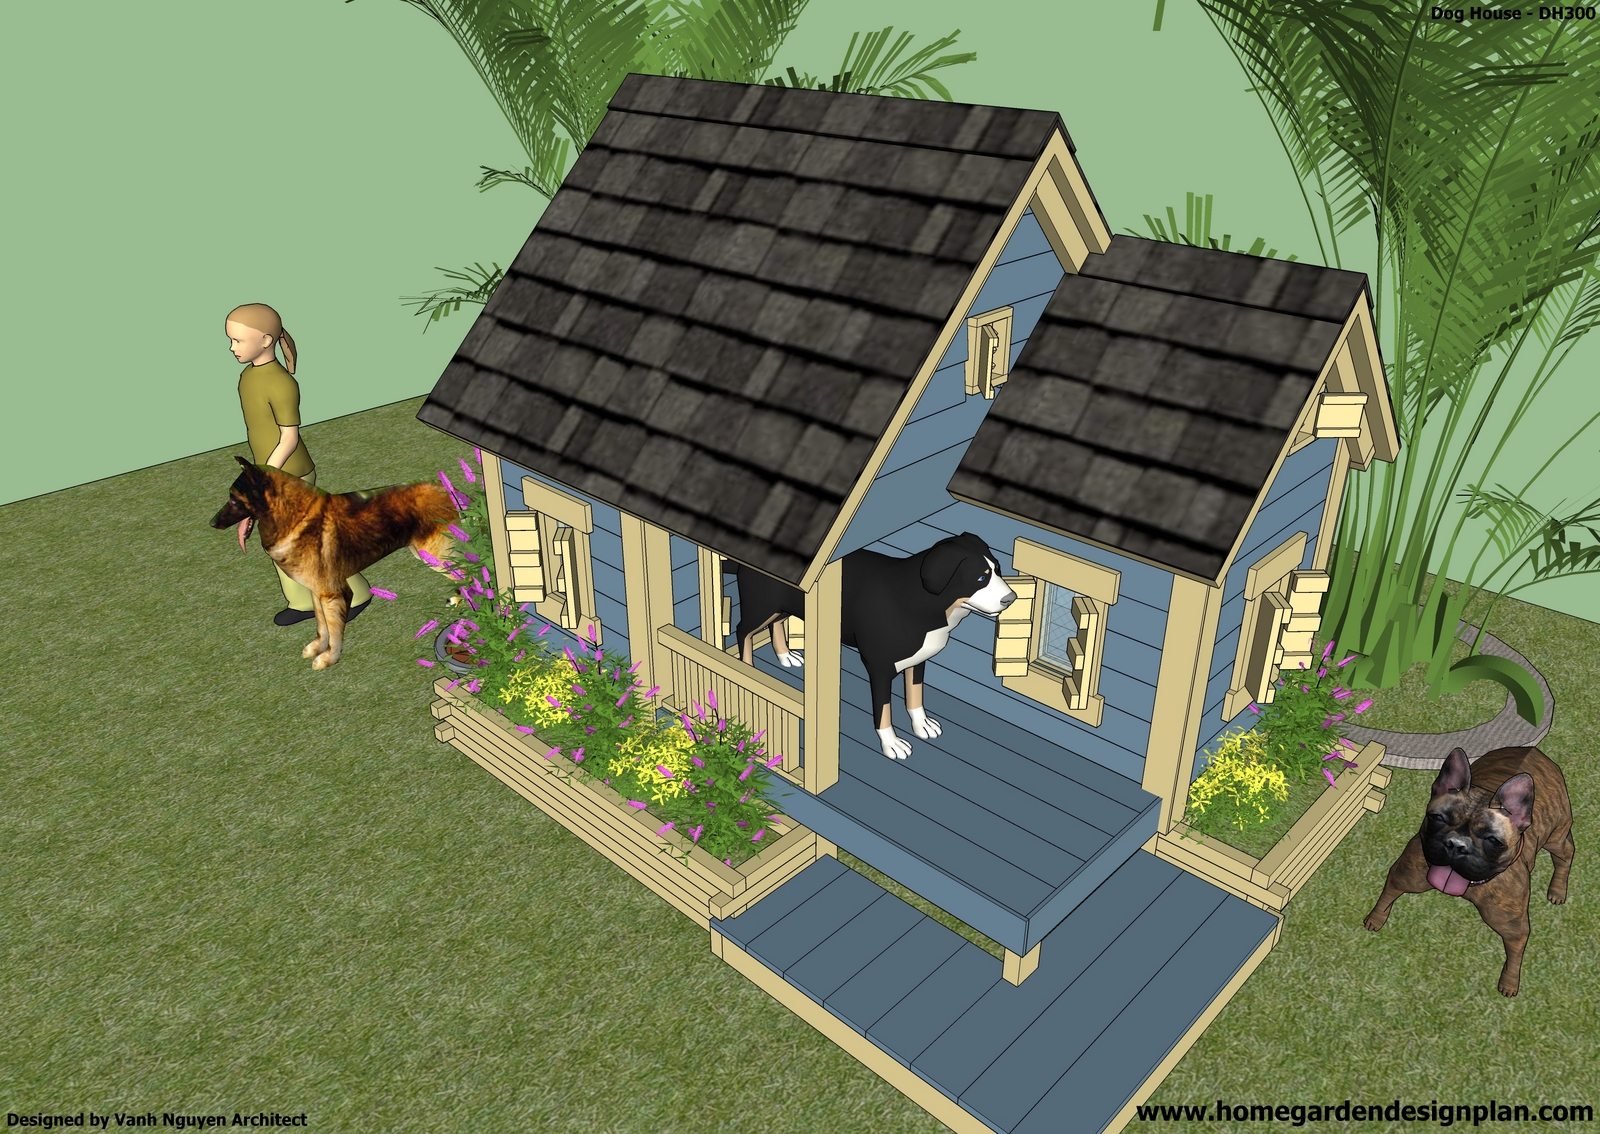 Build Insulated Dog House Plans